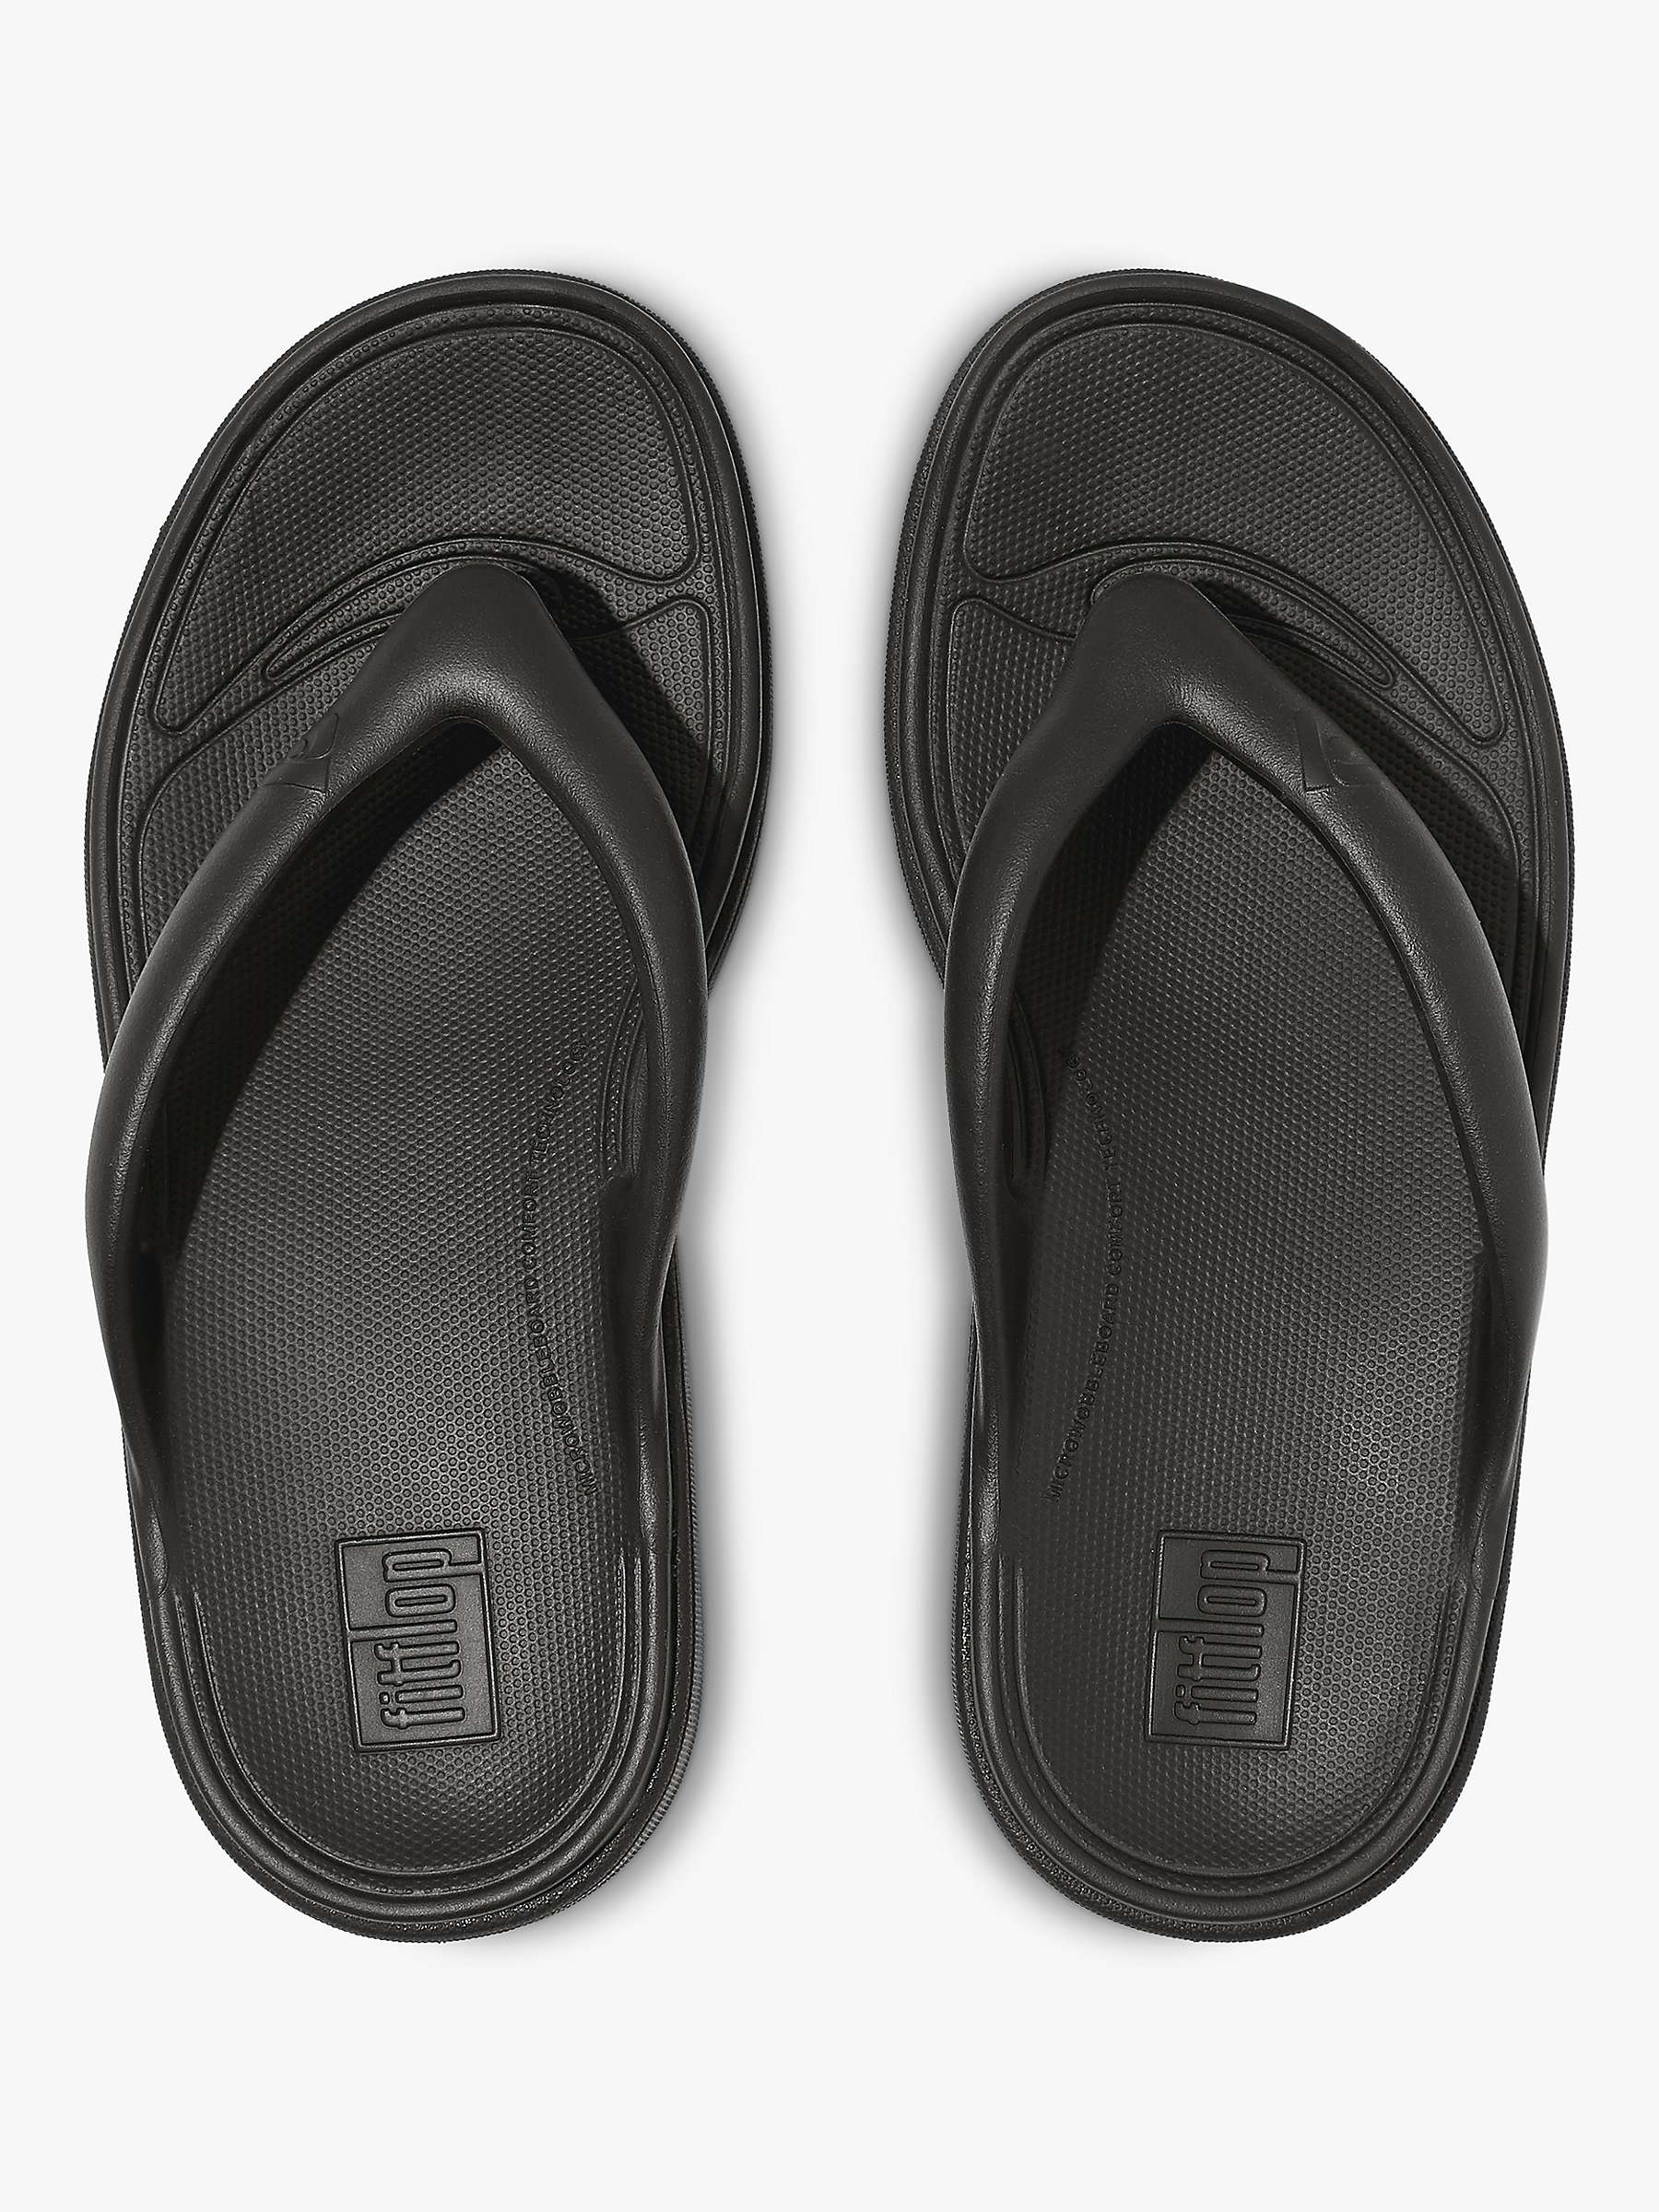 Buy FitFlop Recovery Toe Post Sandals, Black Online at johnlewis.com